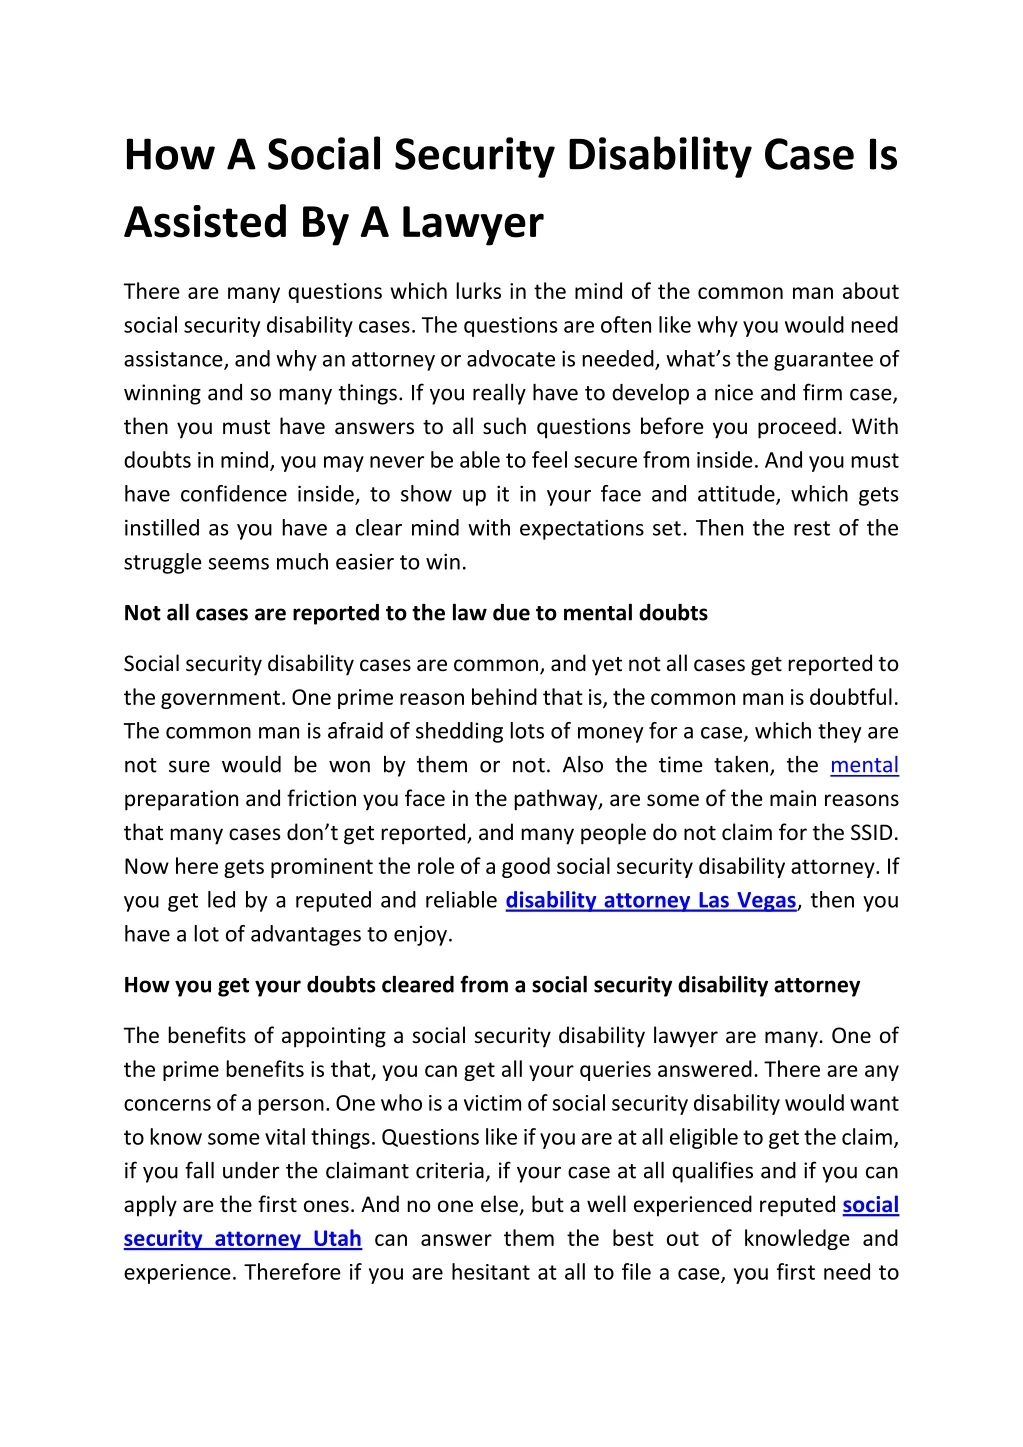 how a social security disability case is assisted